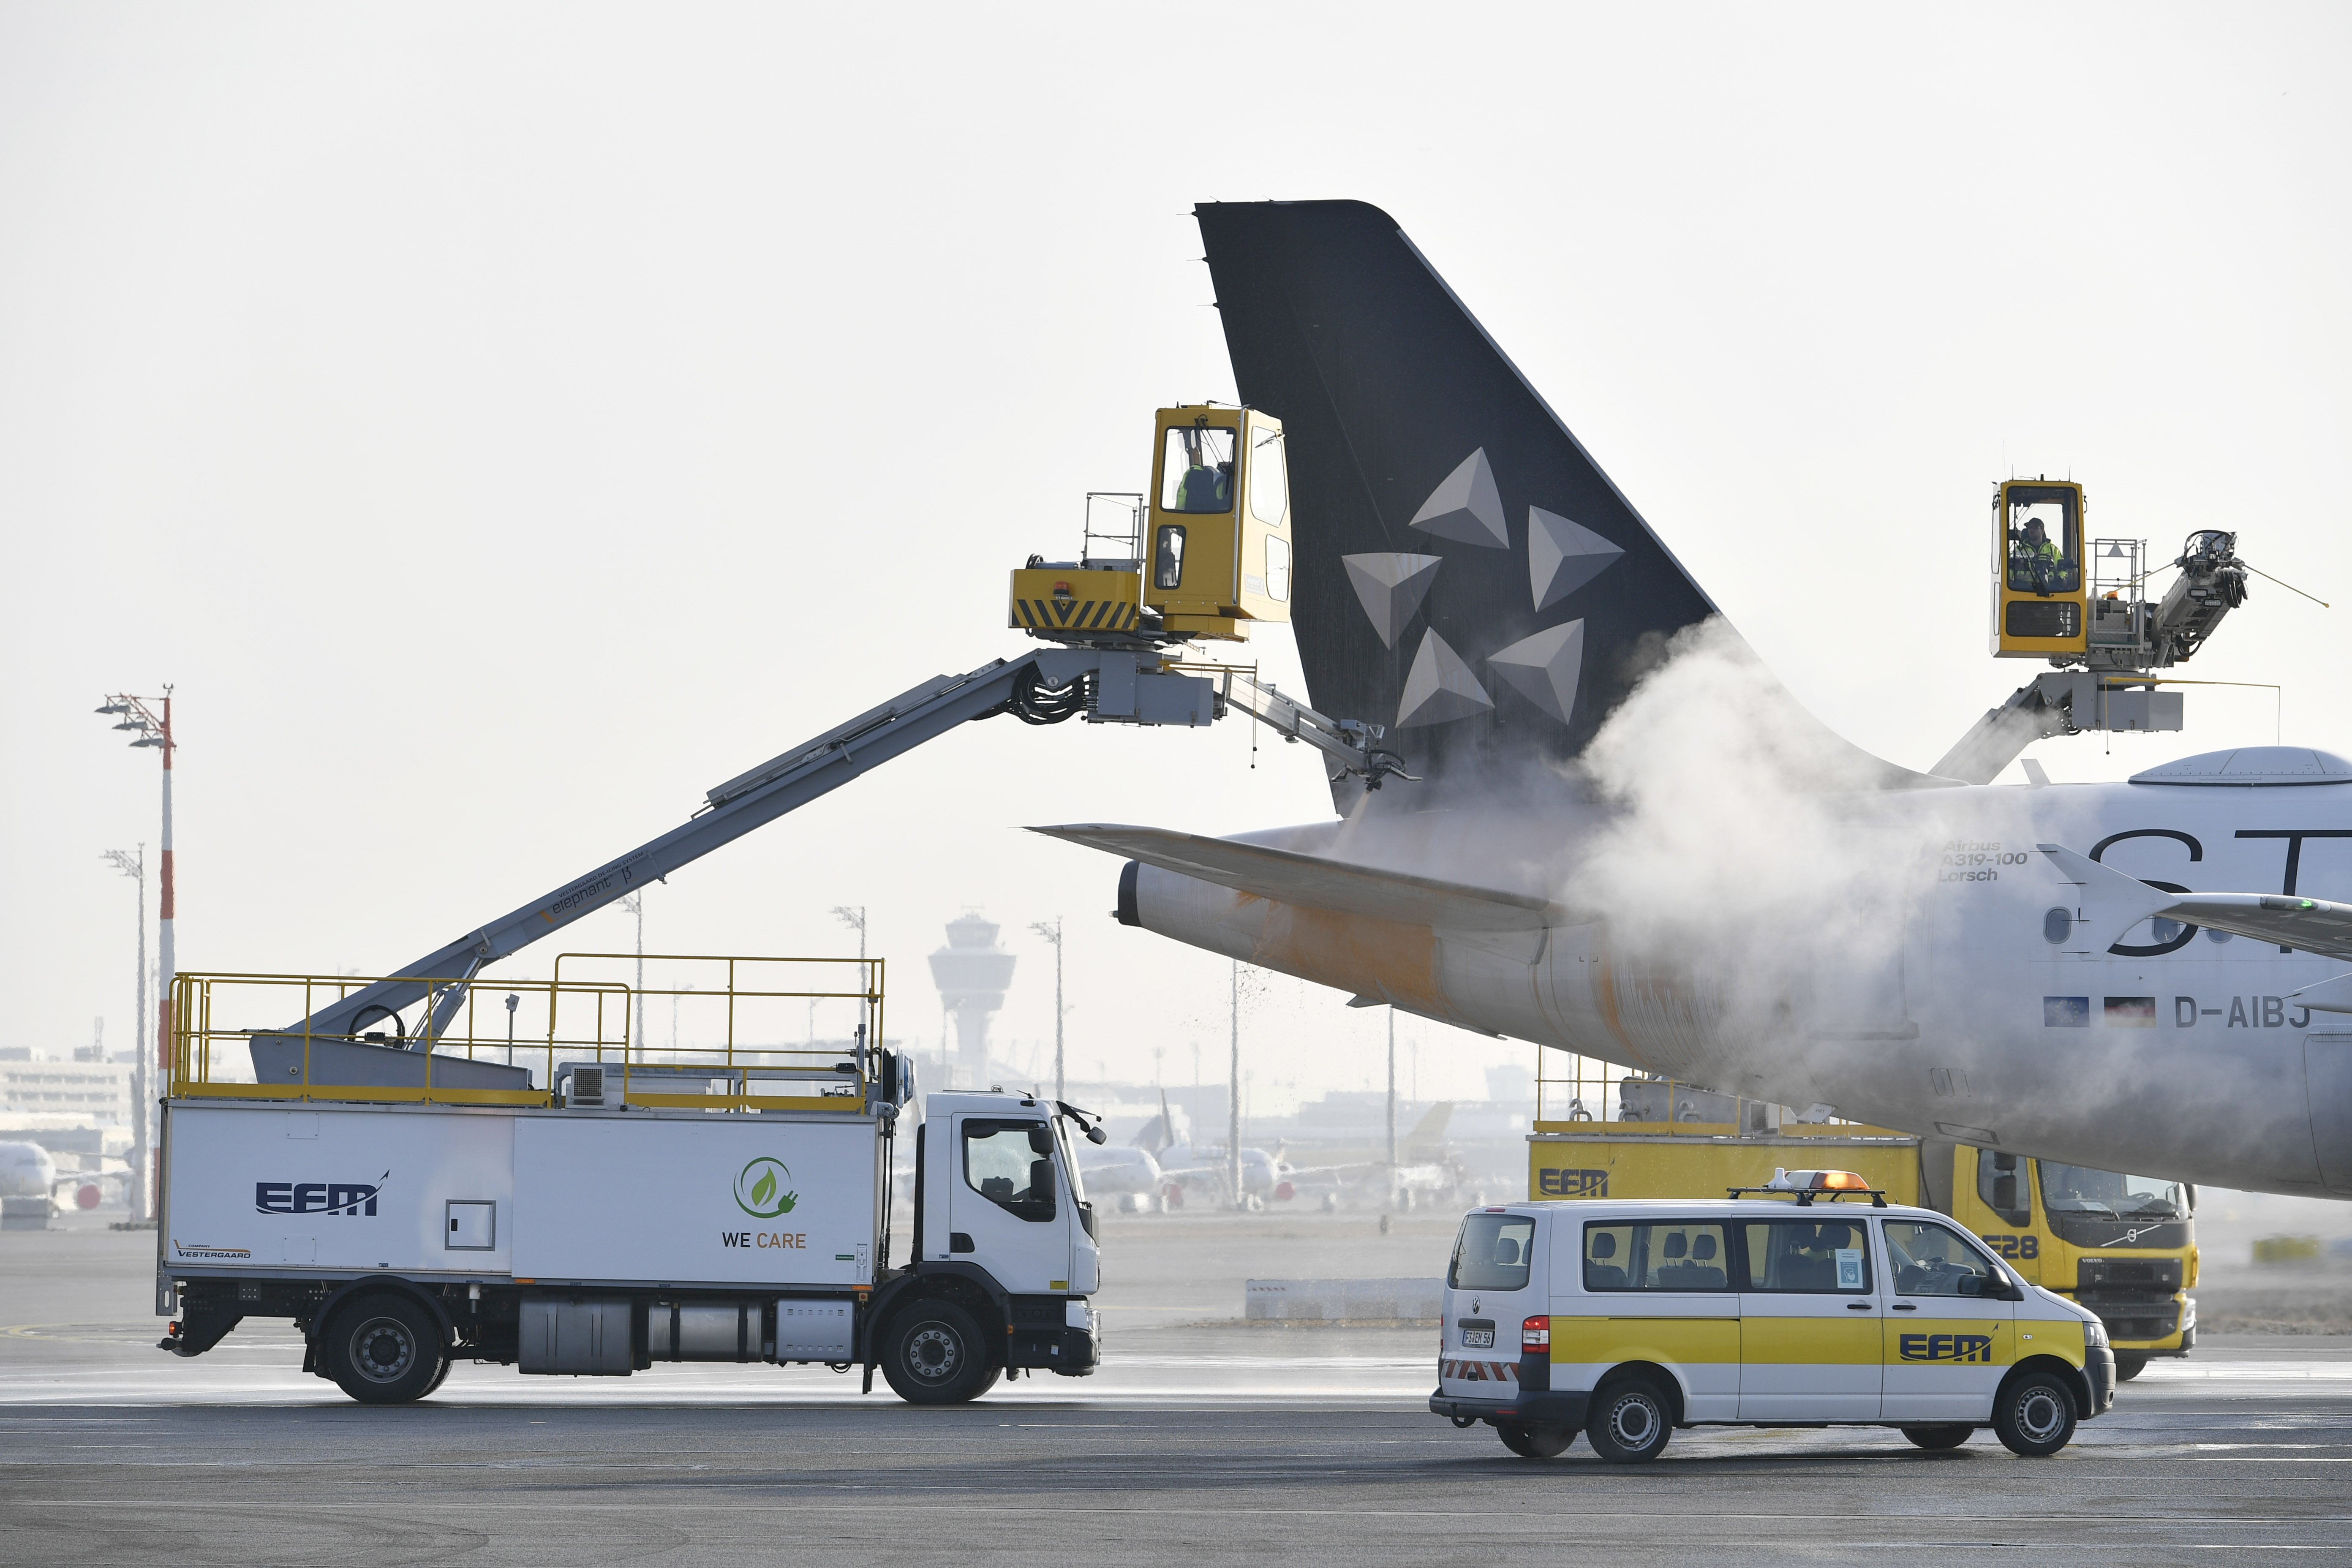 Munich Airport introduces new electric deicing vehicle